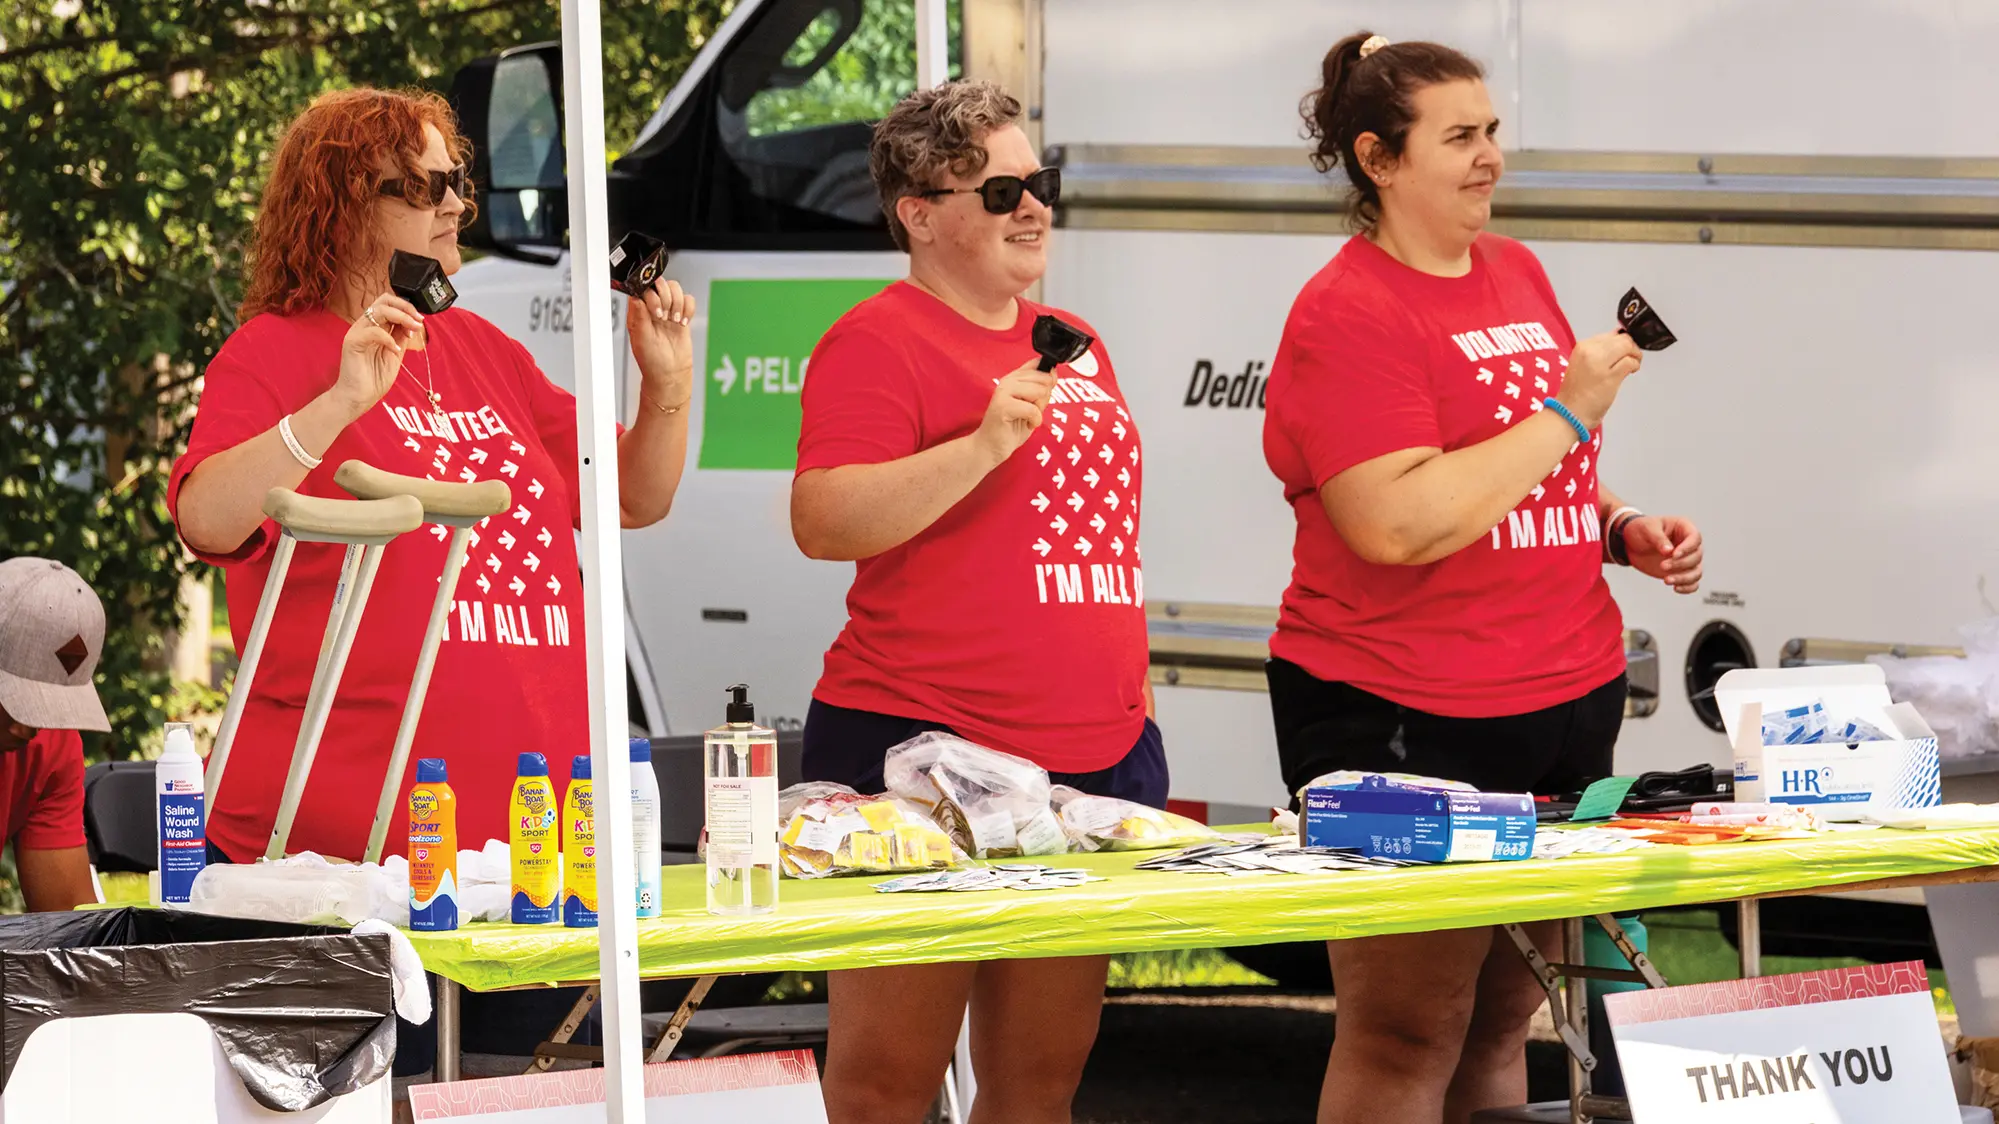 Three smiling white women stand behind a table stocked with first aid gear and sunblock lotion. Each woman rings a bell with her right hand, held about shoulder height, and the first woman has a second bell in her other hand. The bells are short and squat.